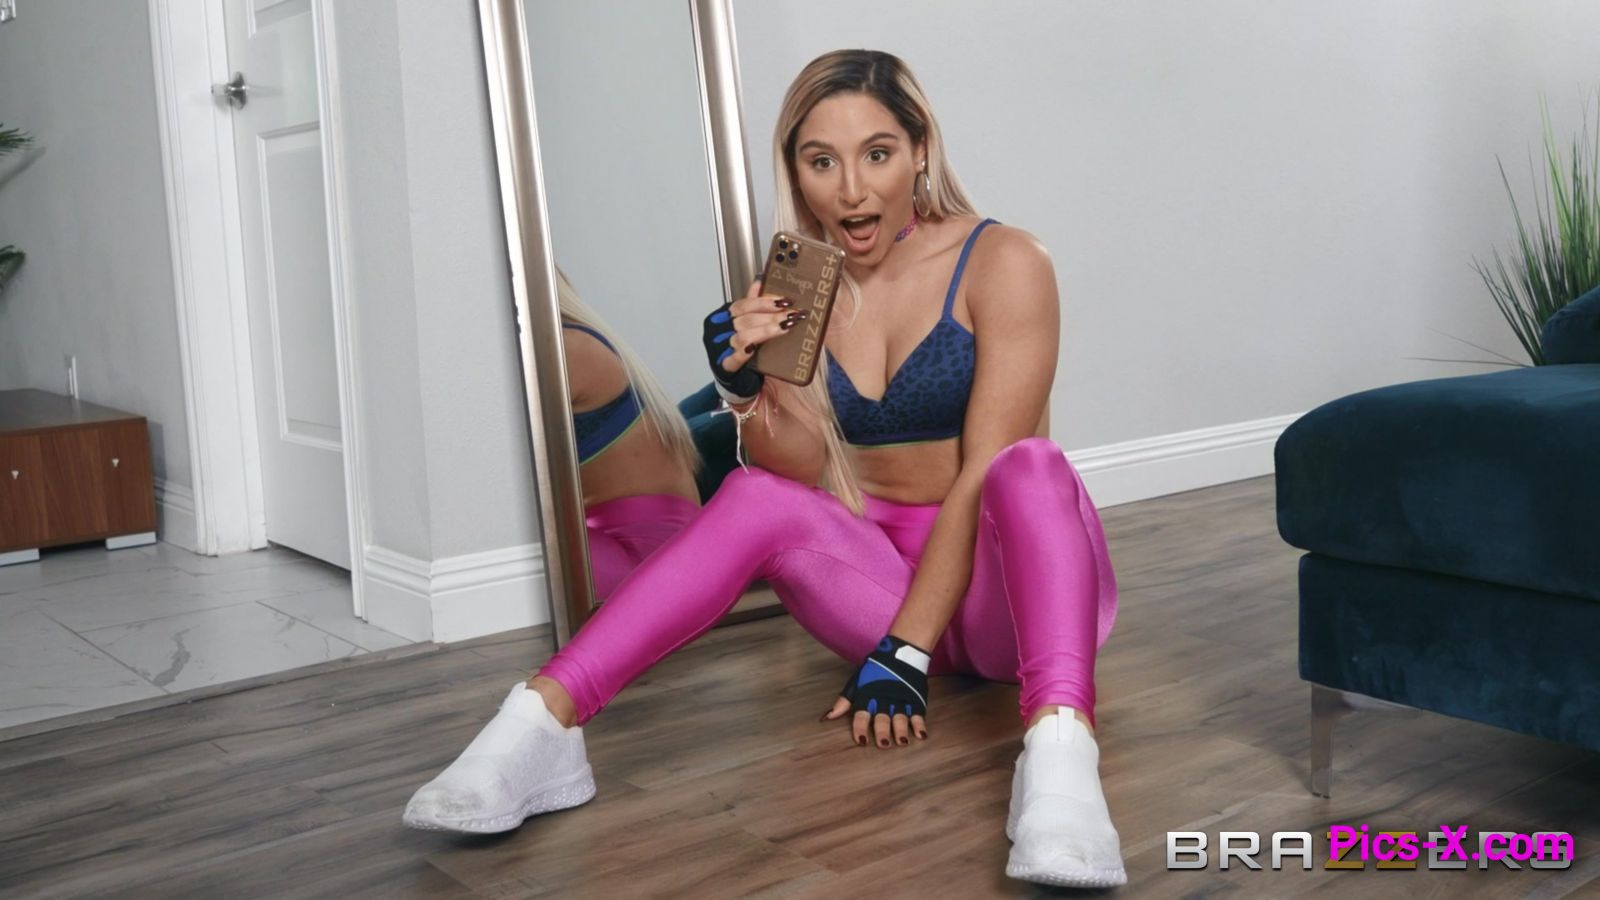 Stay On The Line - Brazzers Exxtra - Image 7